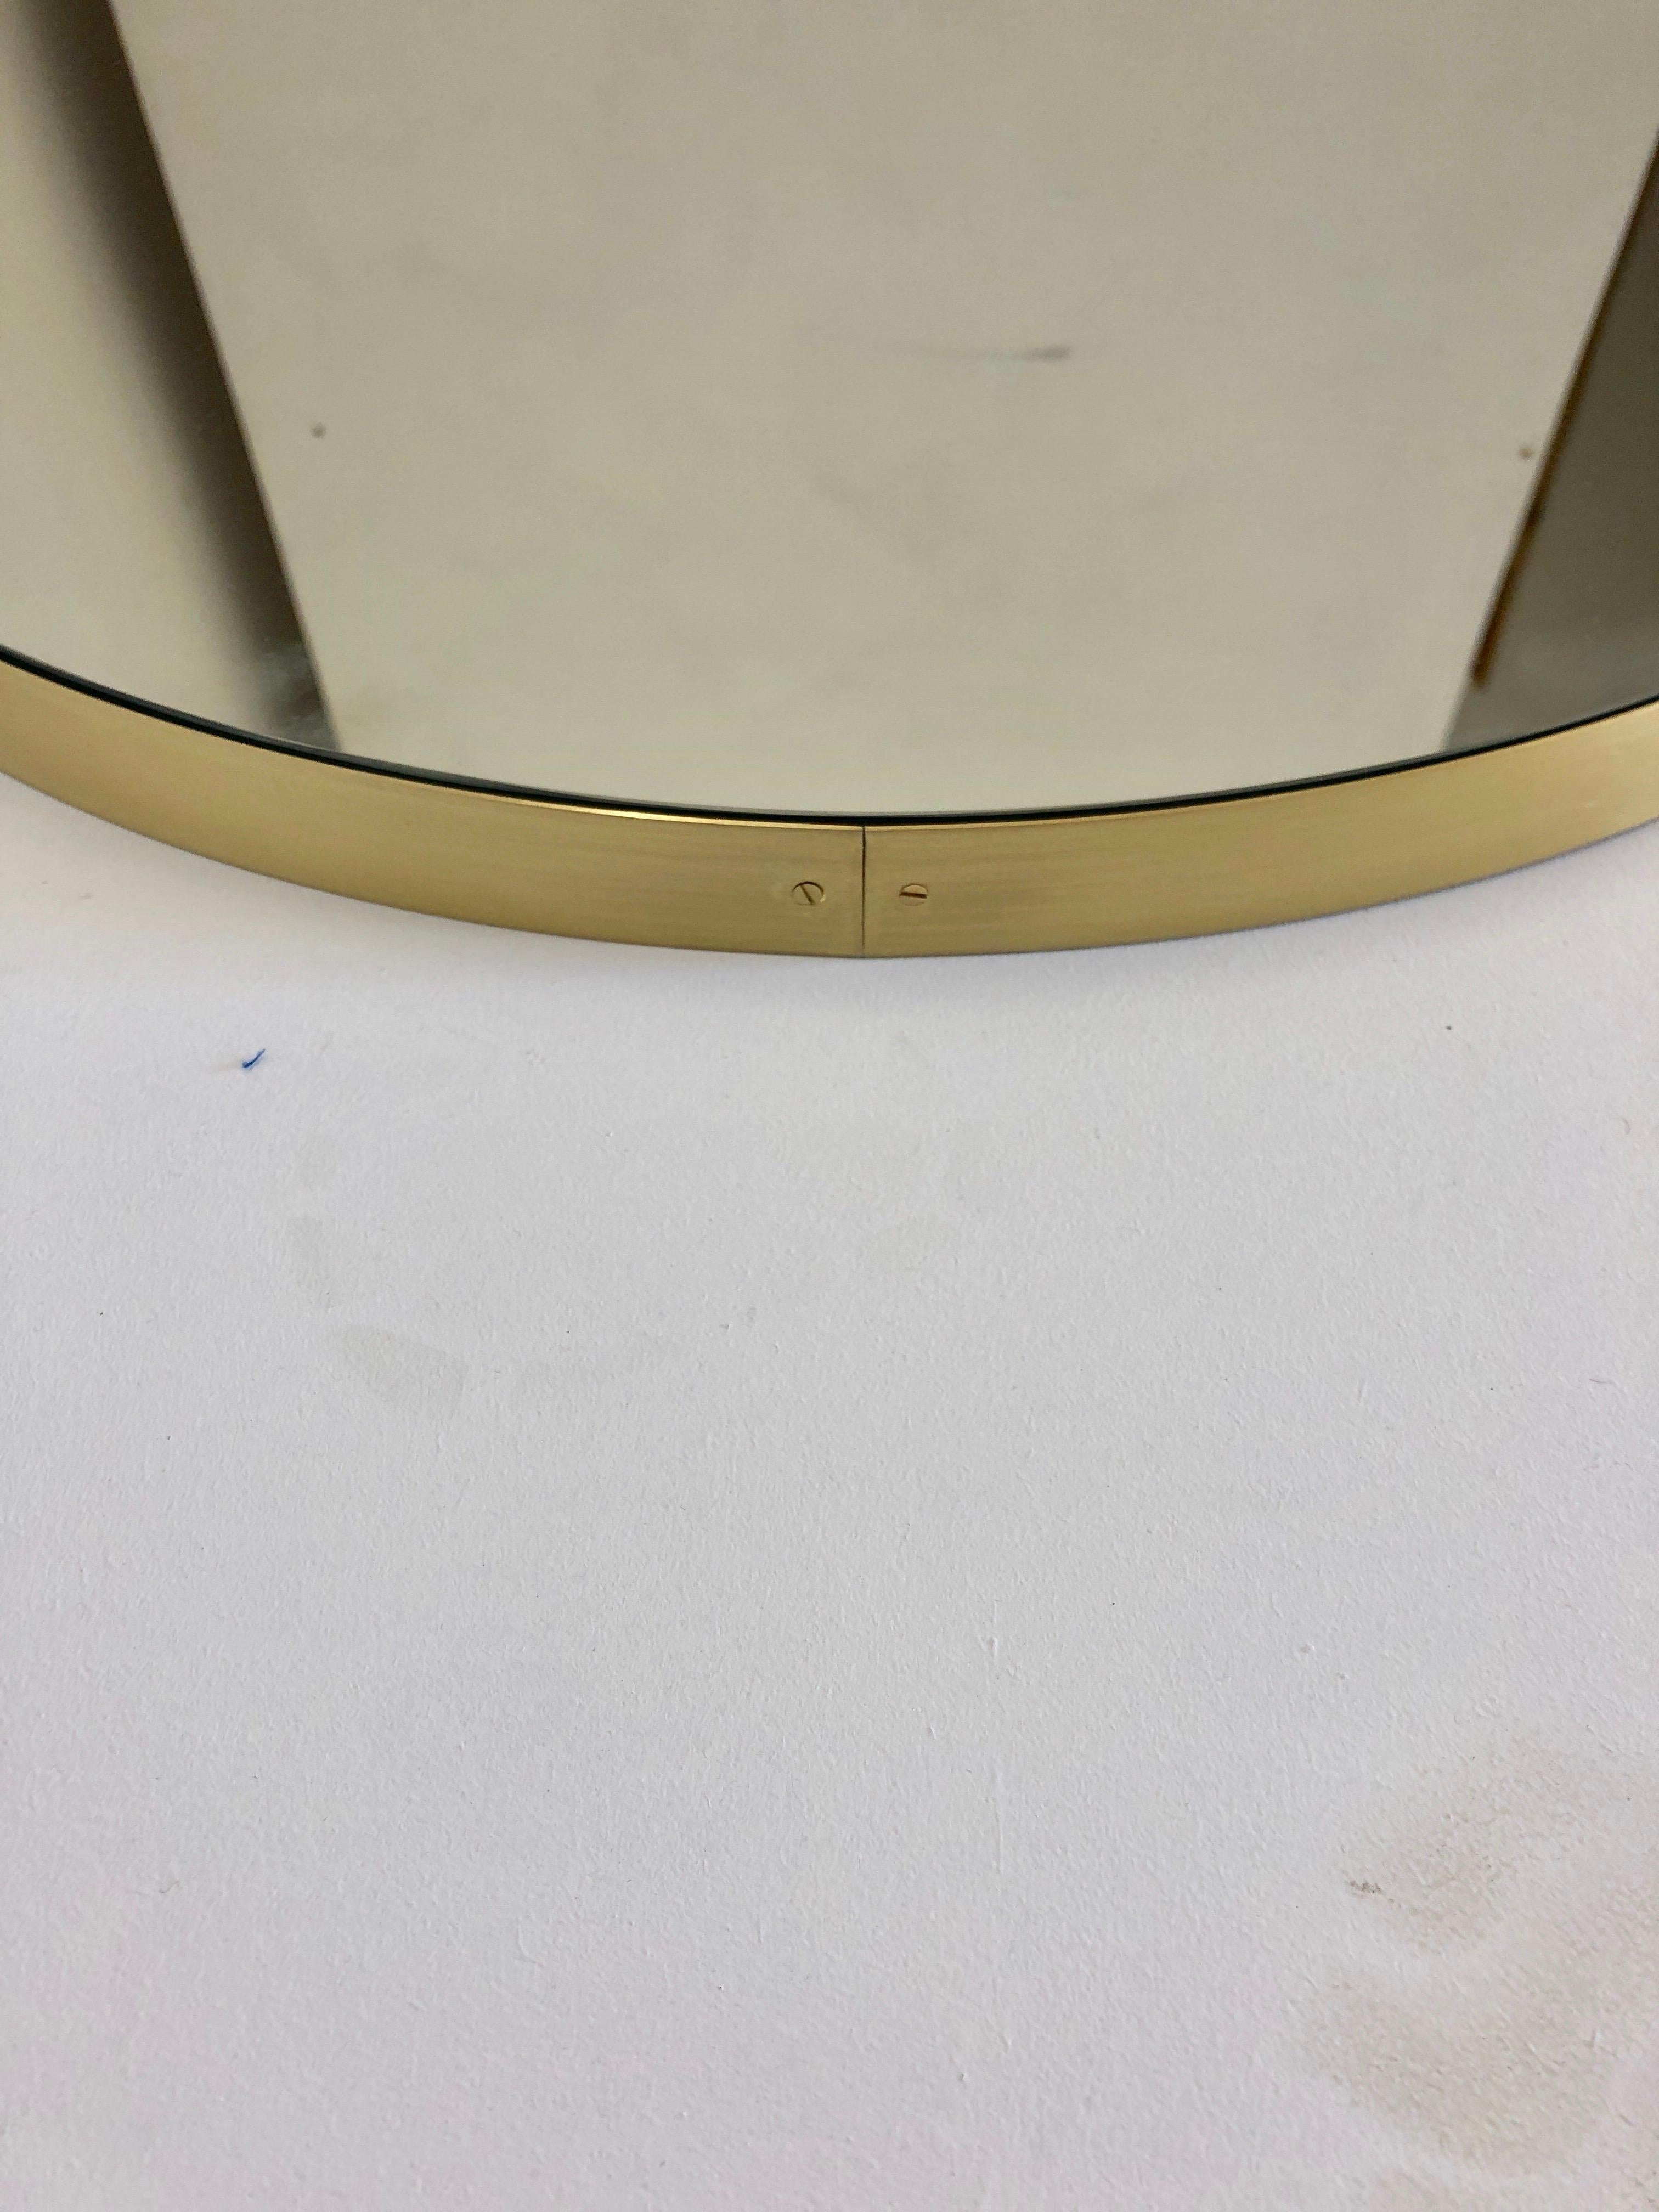 Organic Modern Orbis™ Round Double Sided Suspended Bathroom Mirror with a Brass Frame